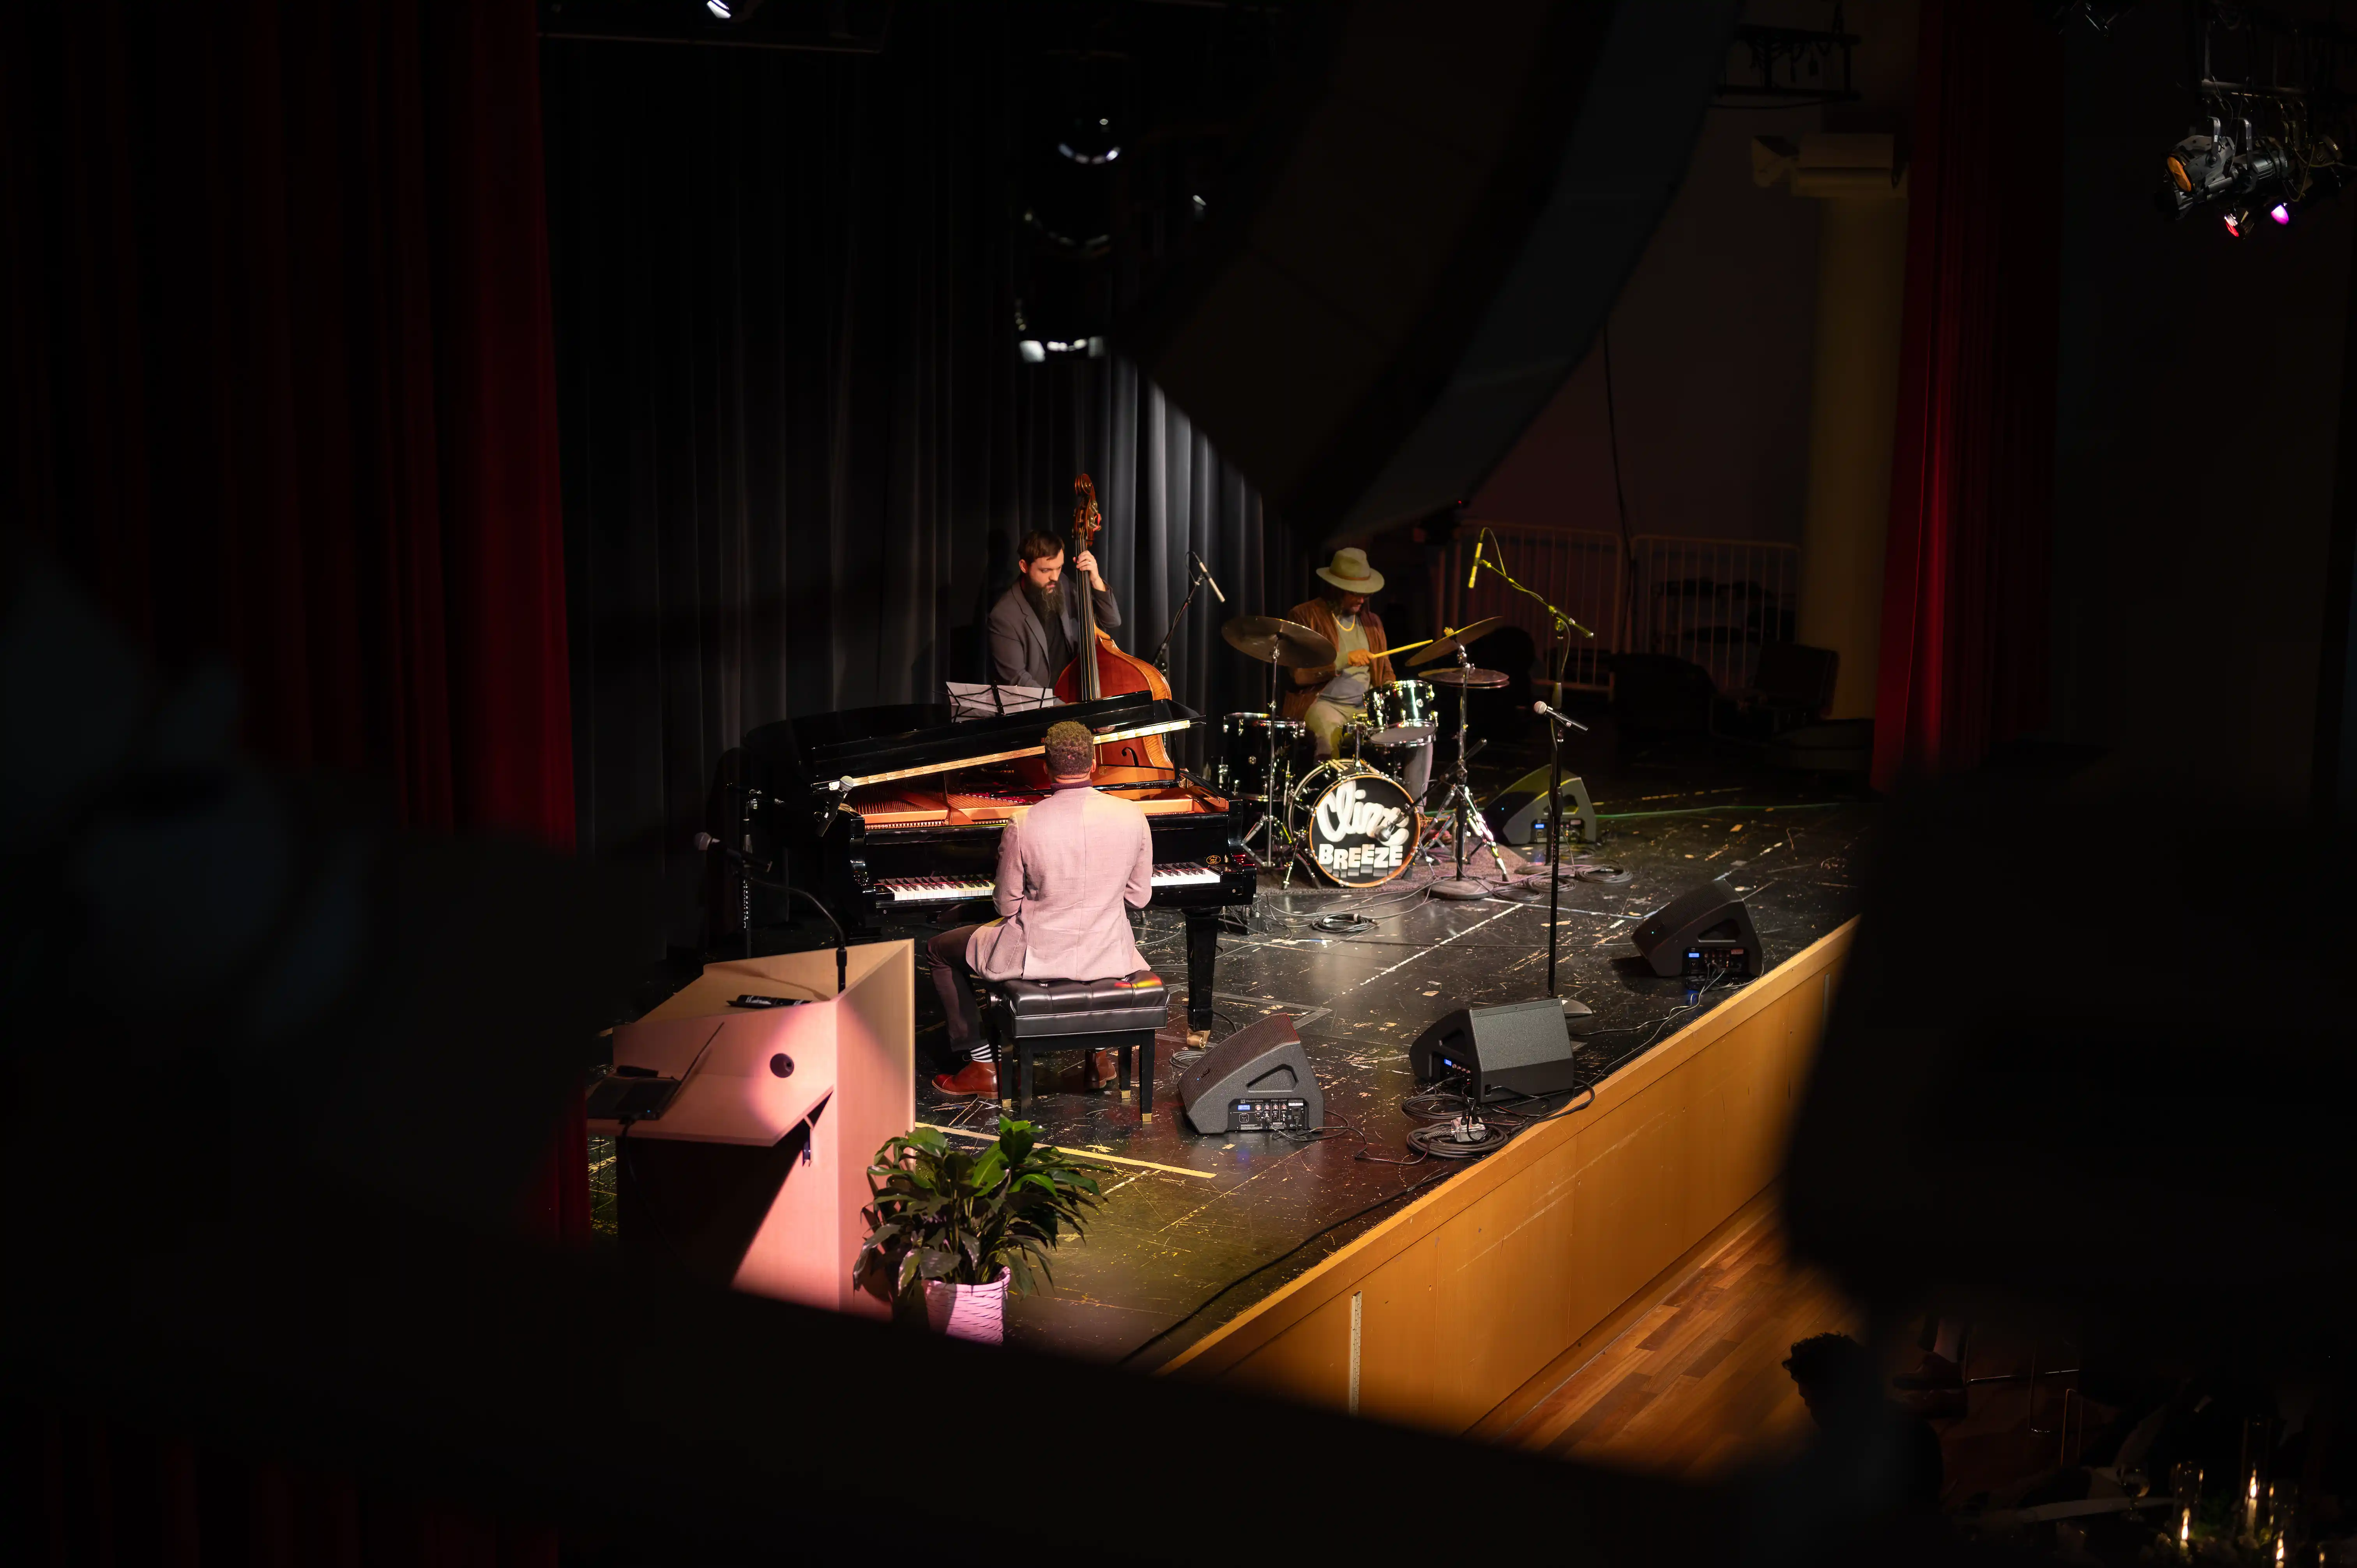 Musicians performing on stage with a piano, bass, and microphone setup in a dimly lit venue.